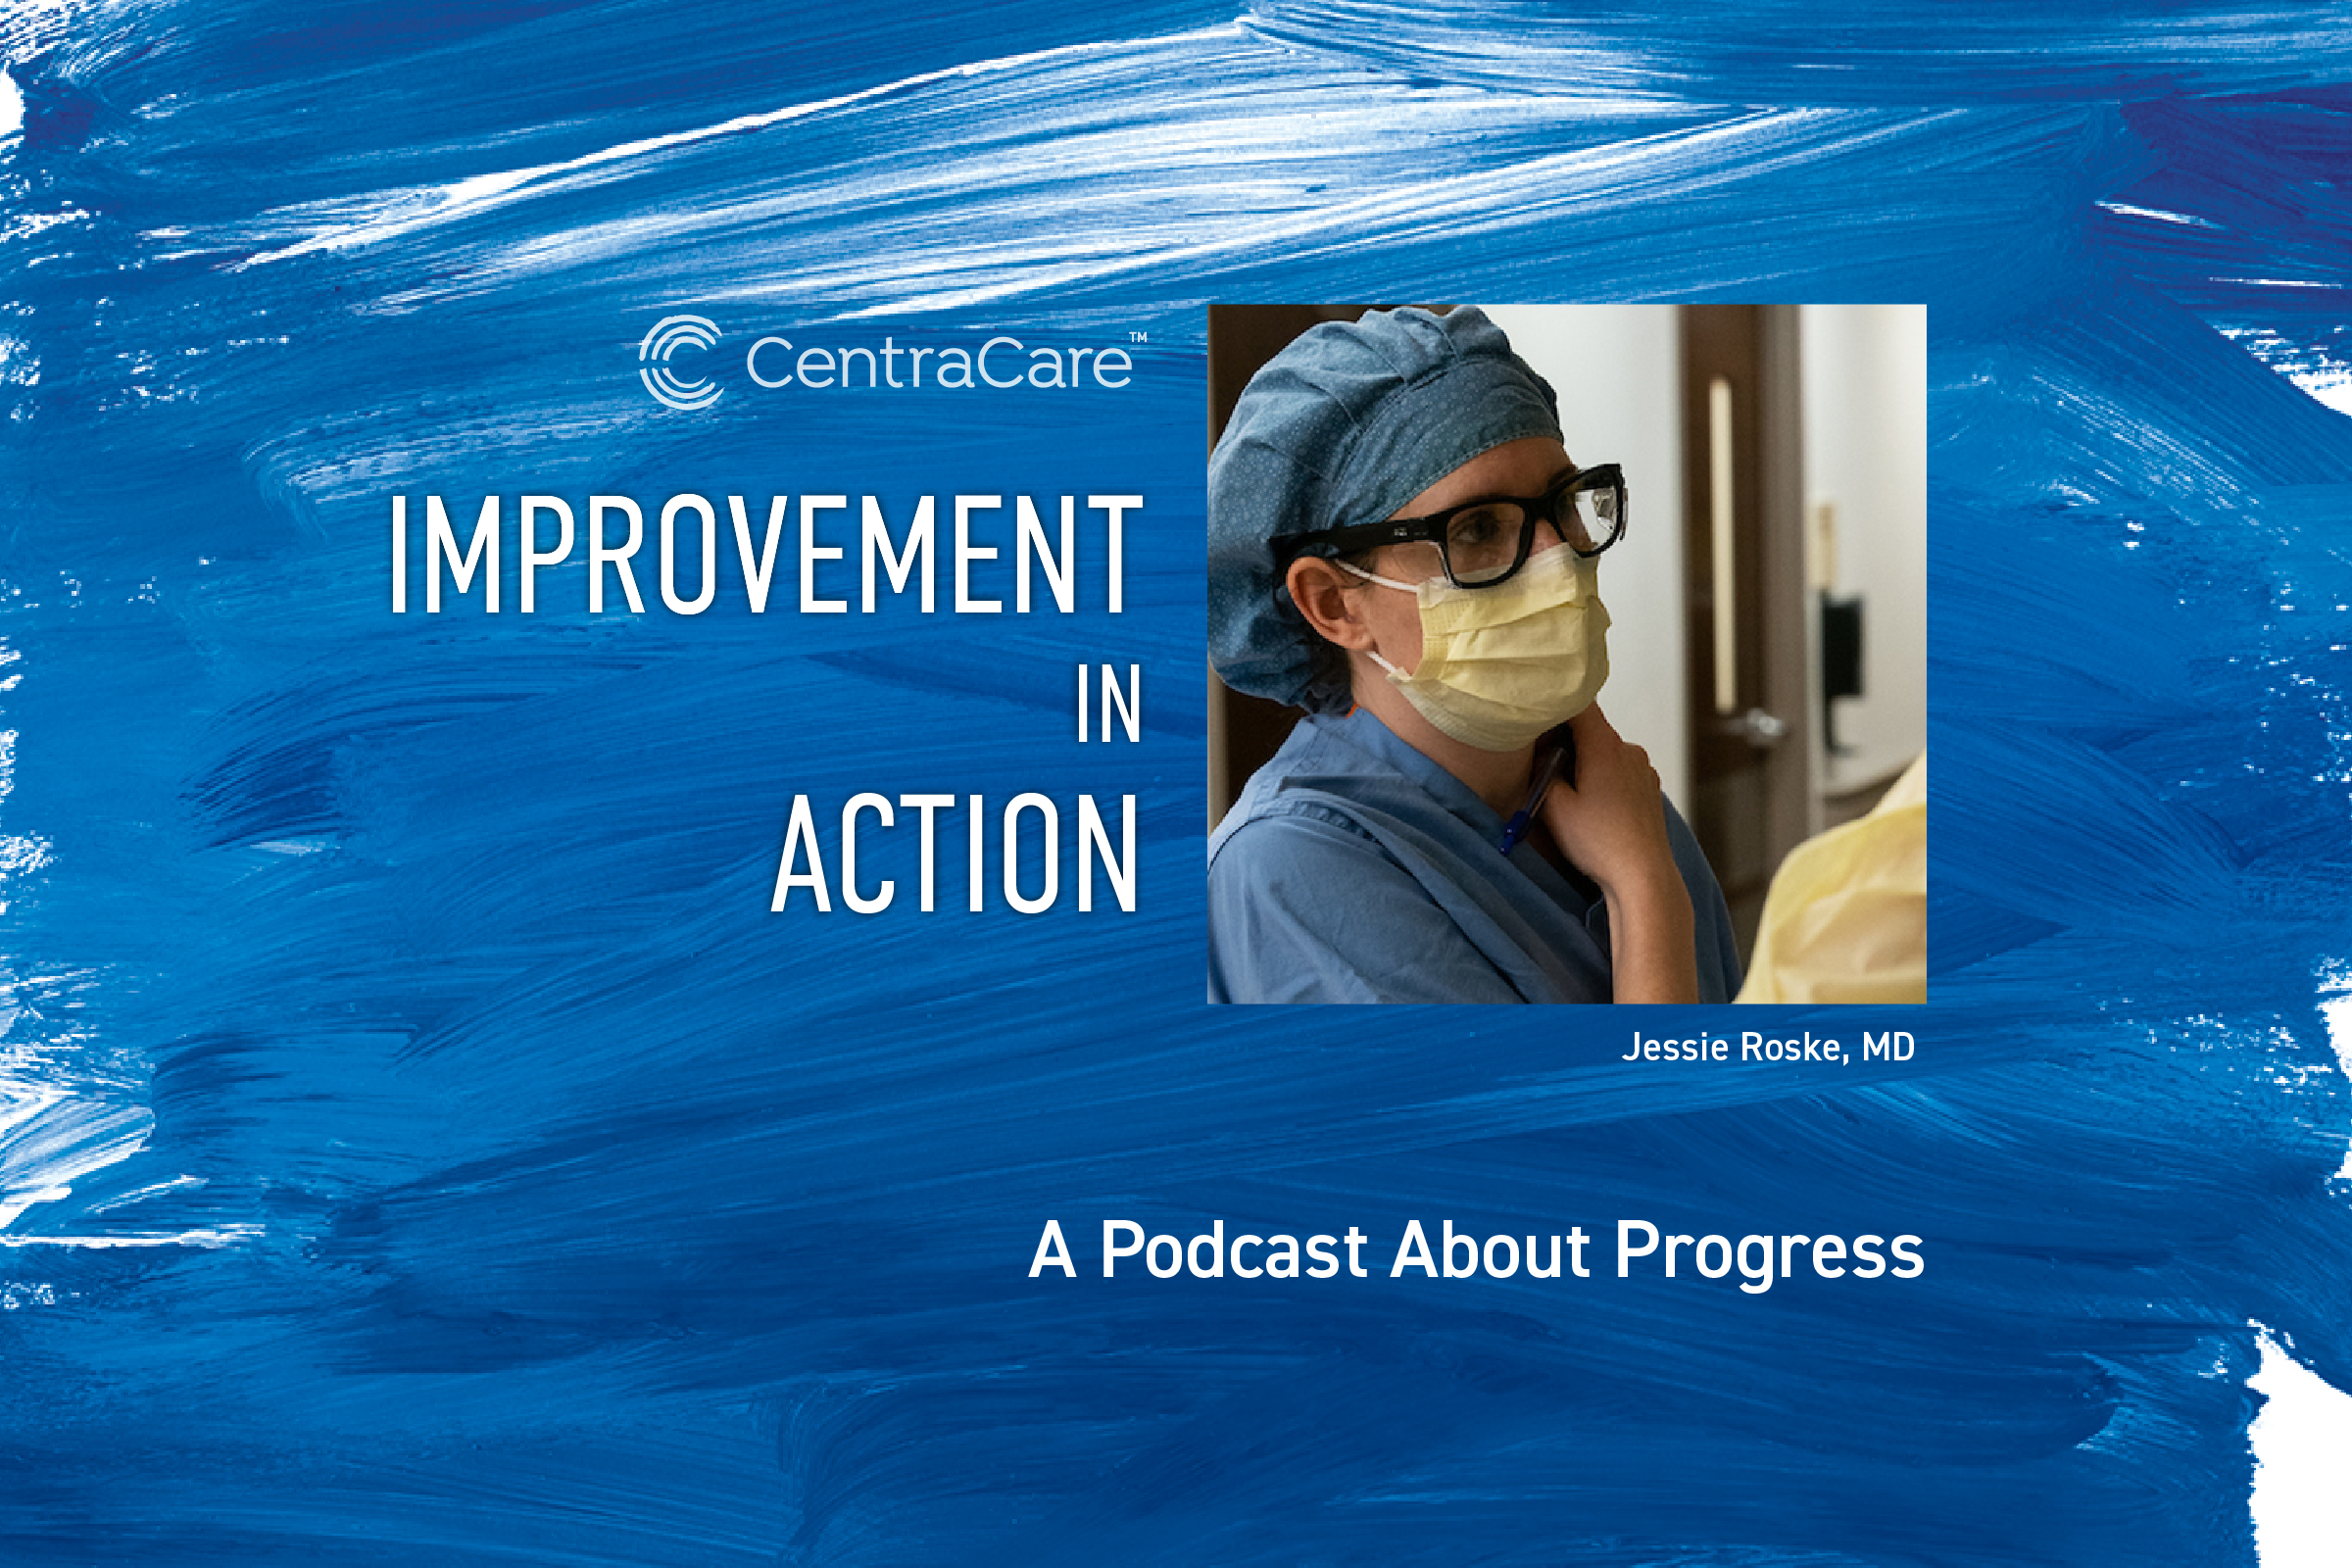 Postcard promoting the Improvement in Action podcast with Dr. Jessie Roske